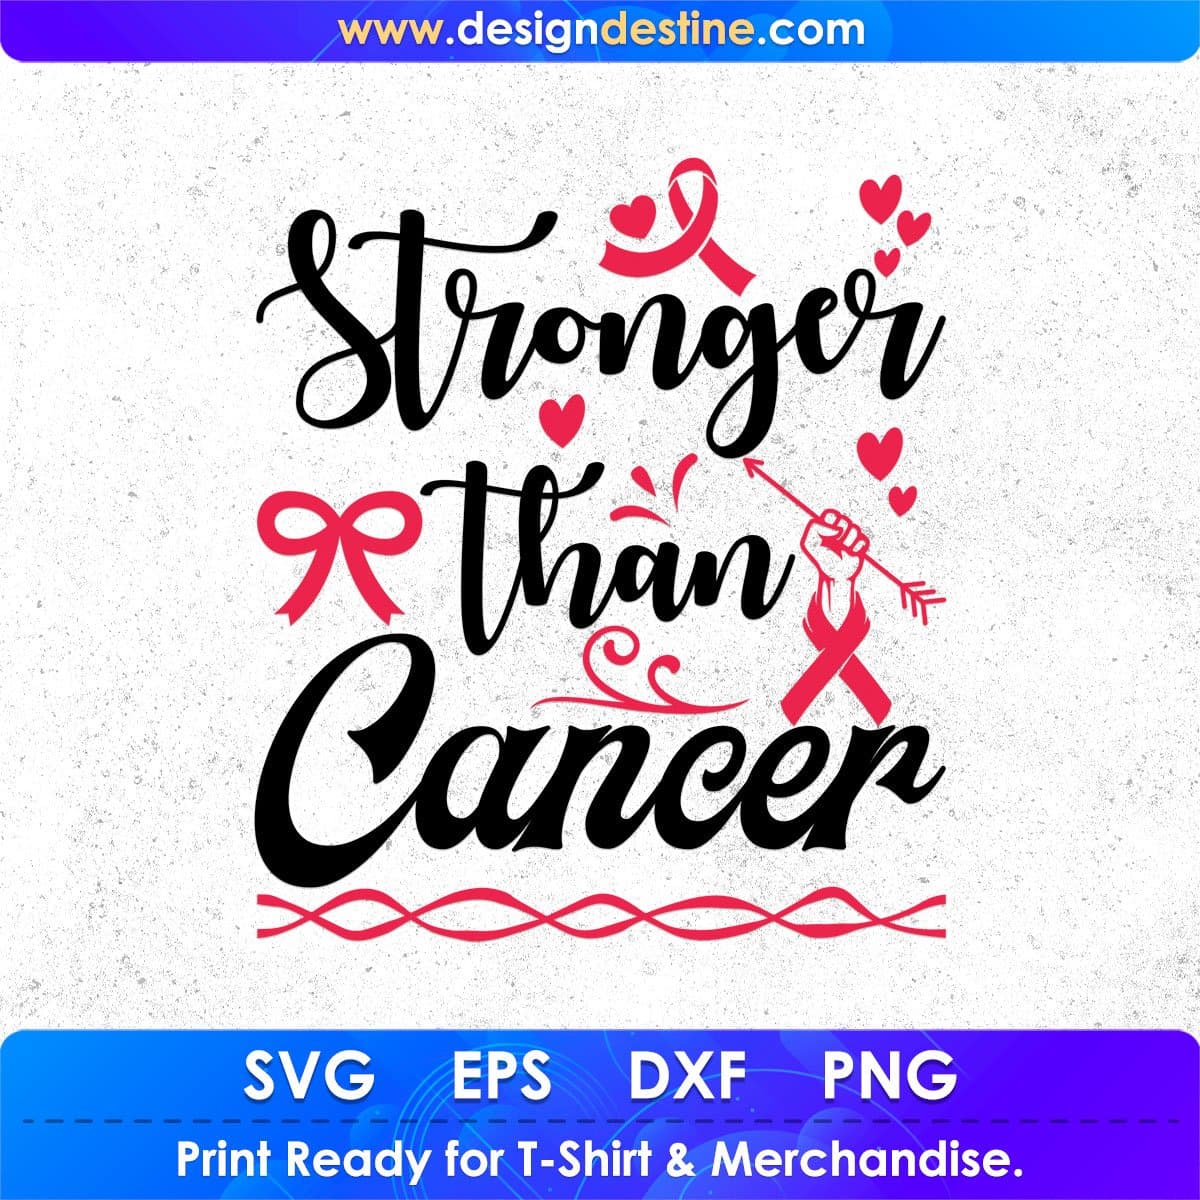 Stronger Than Cancer Awareness T shirt Design In Svg Png Cutting Printable Files